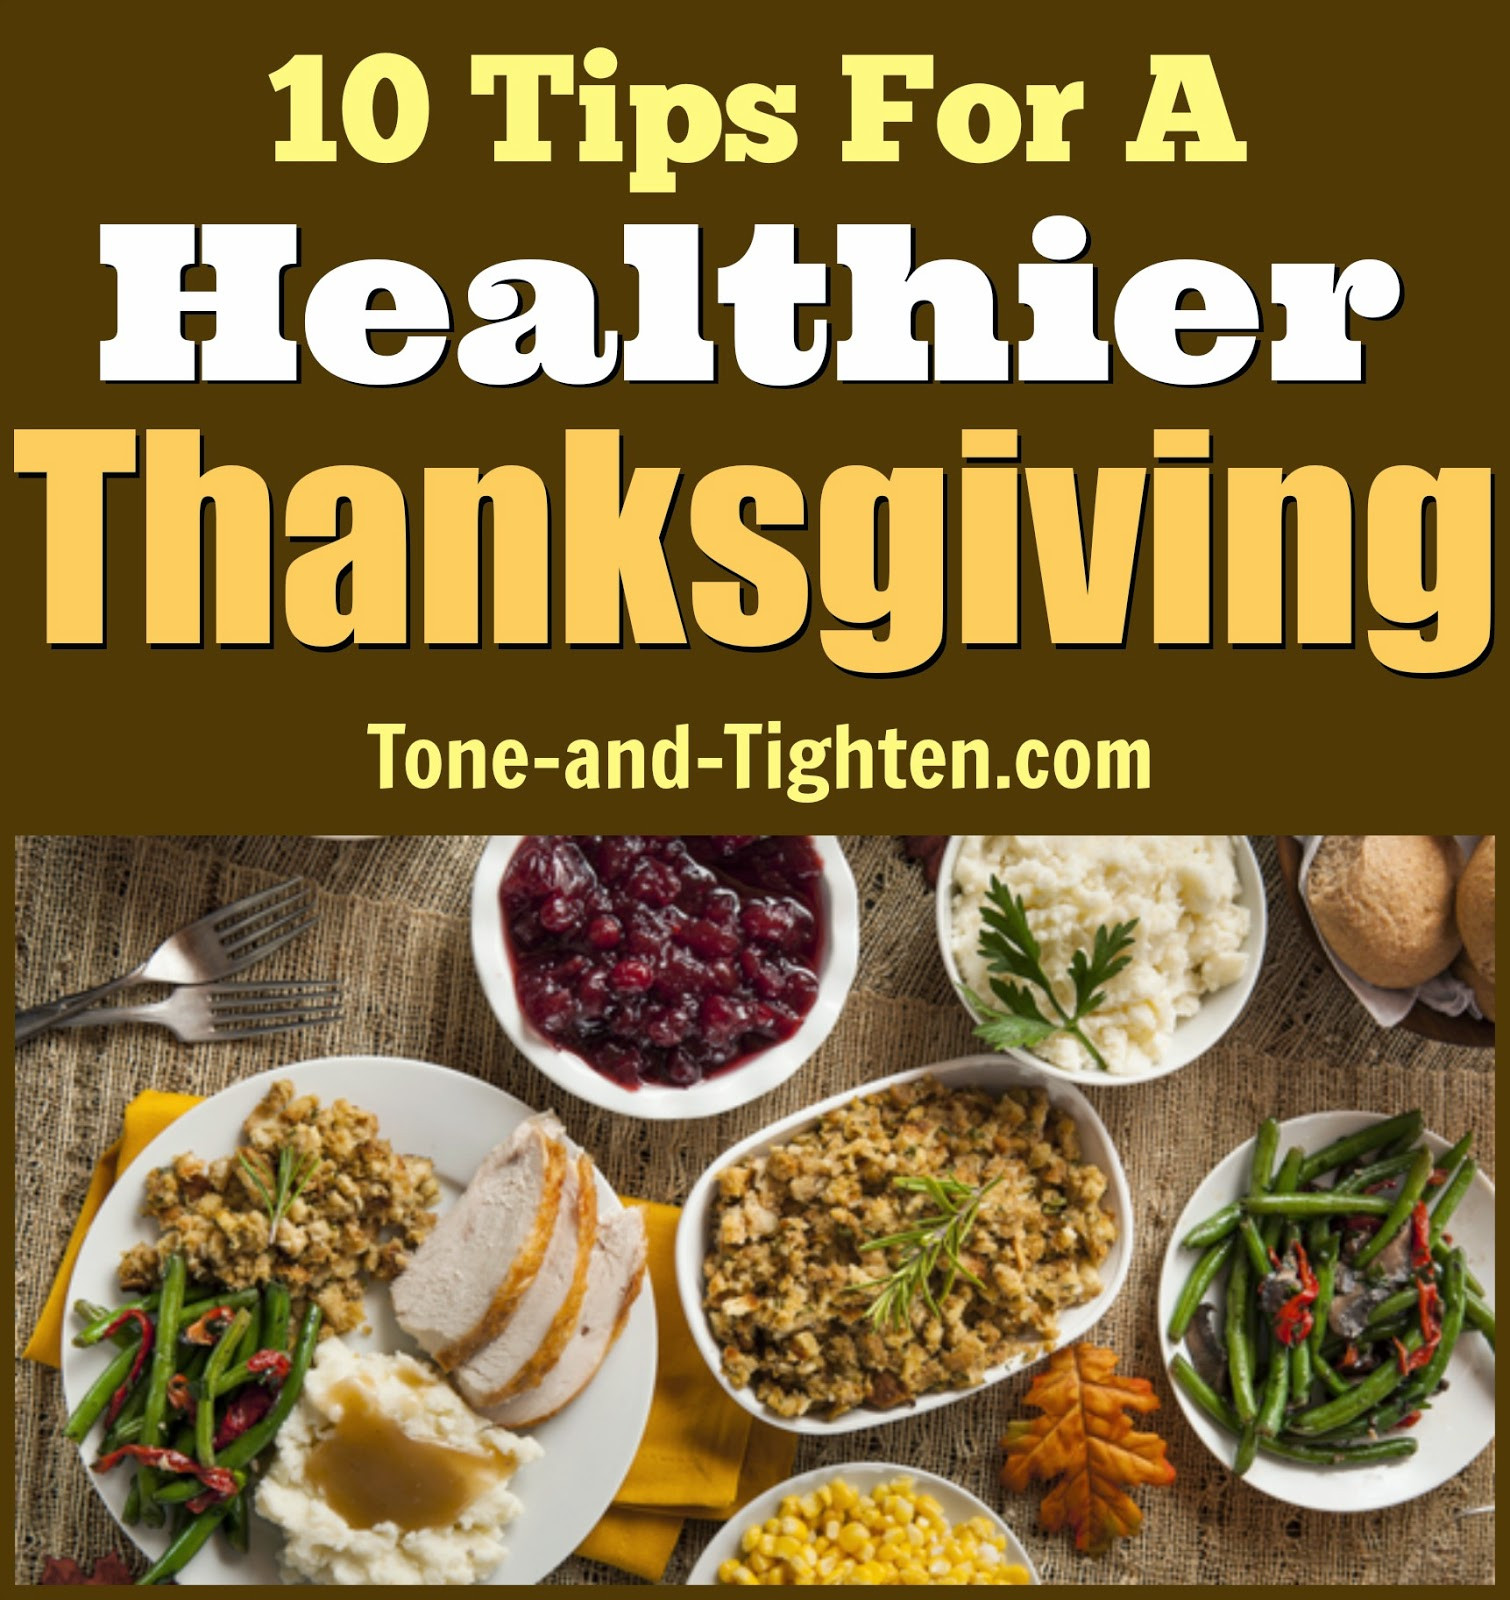 Healthy Thanksgiving Tips
 25 Healthy Thanksgiving Side Dishes – Healthier options